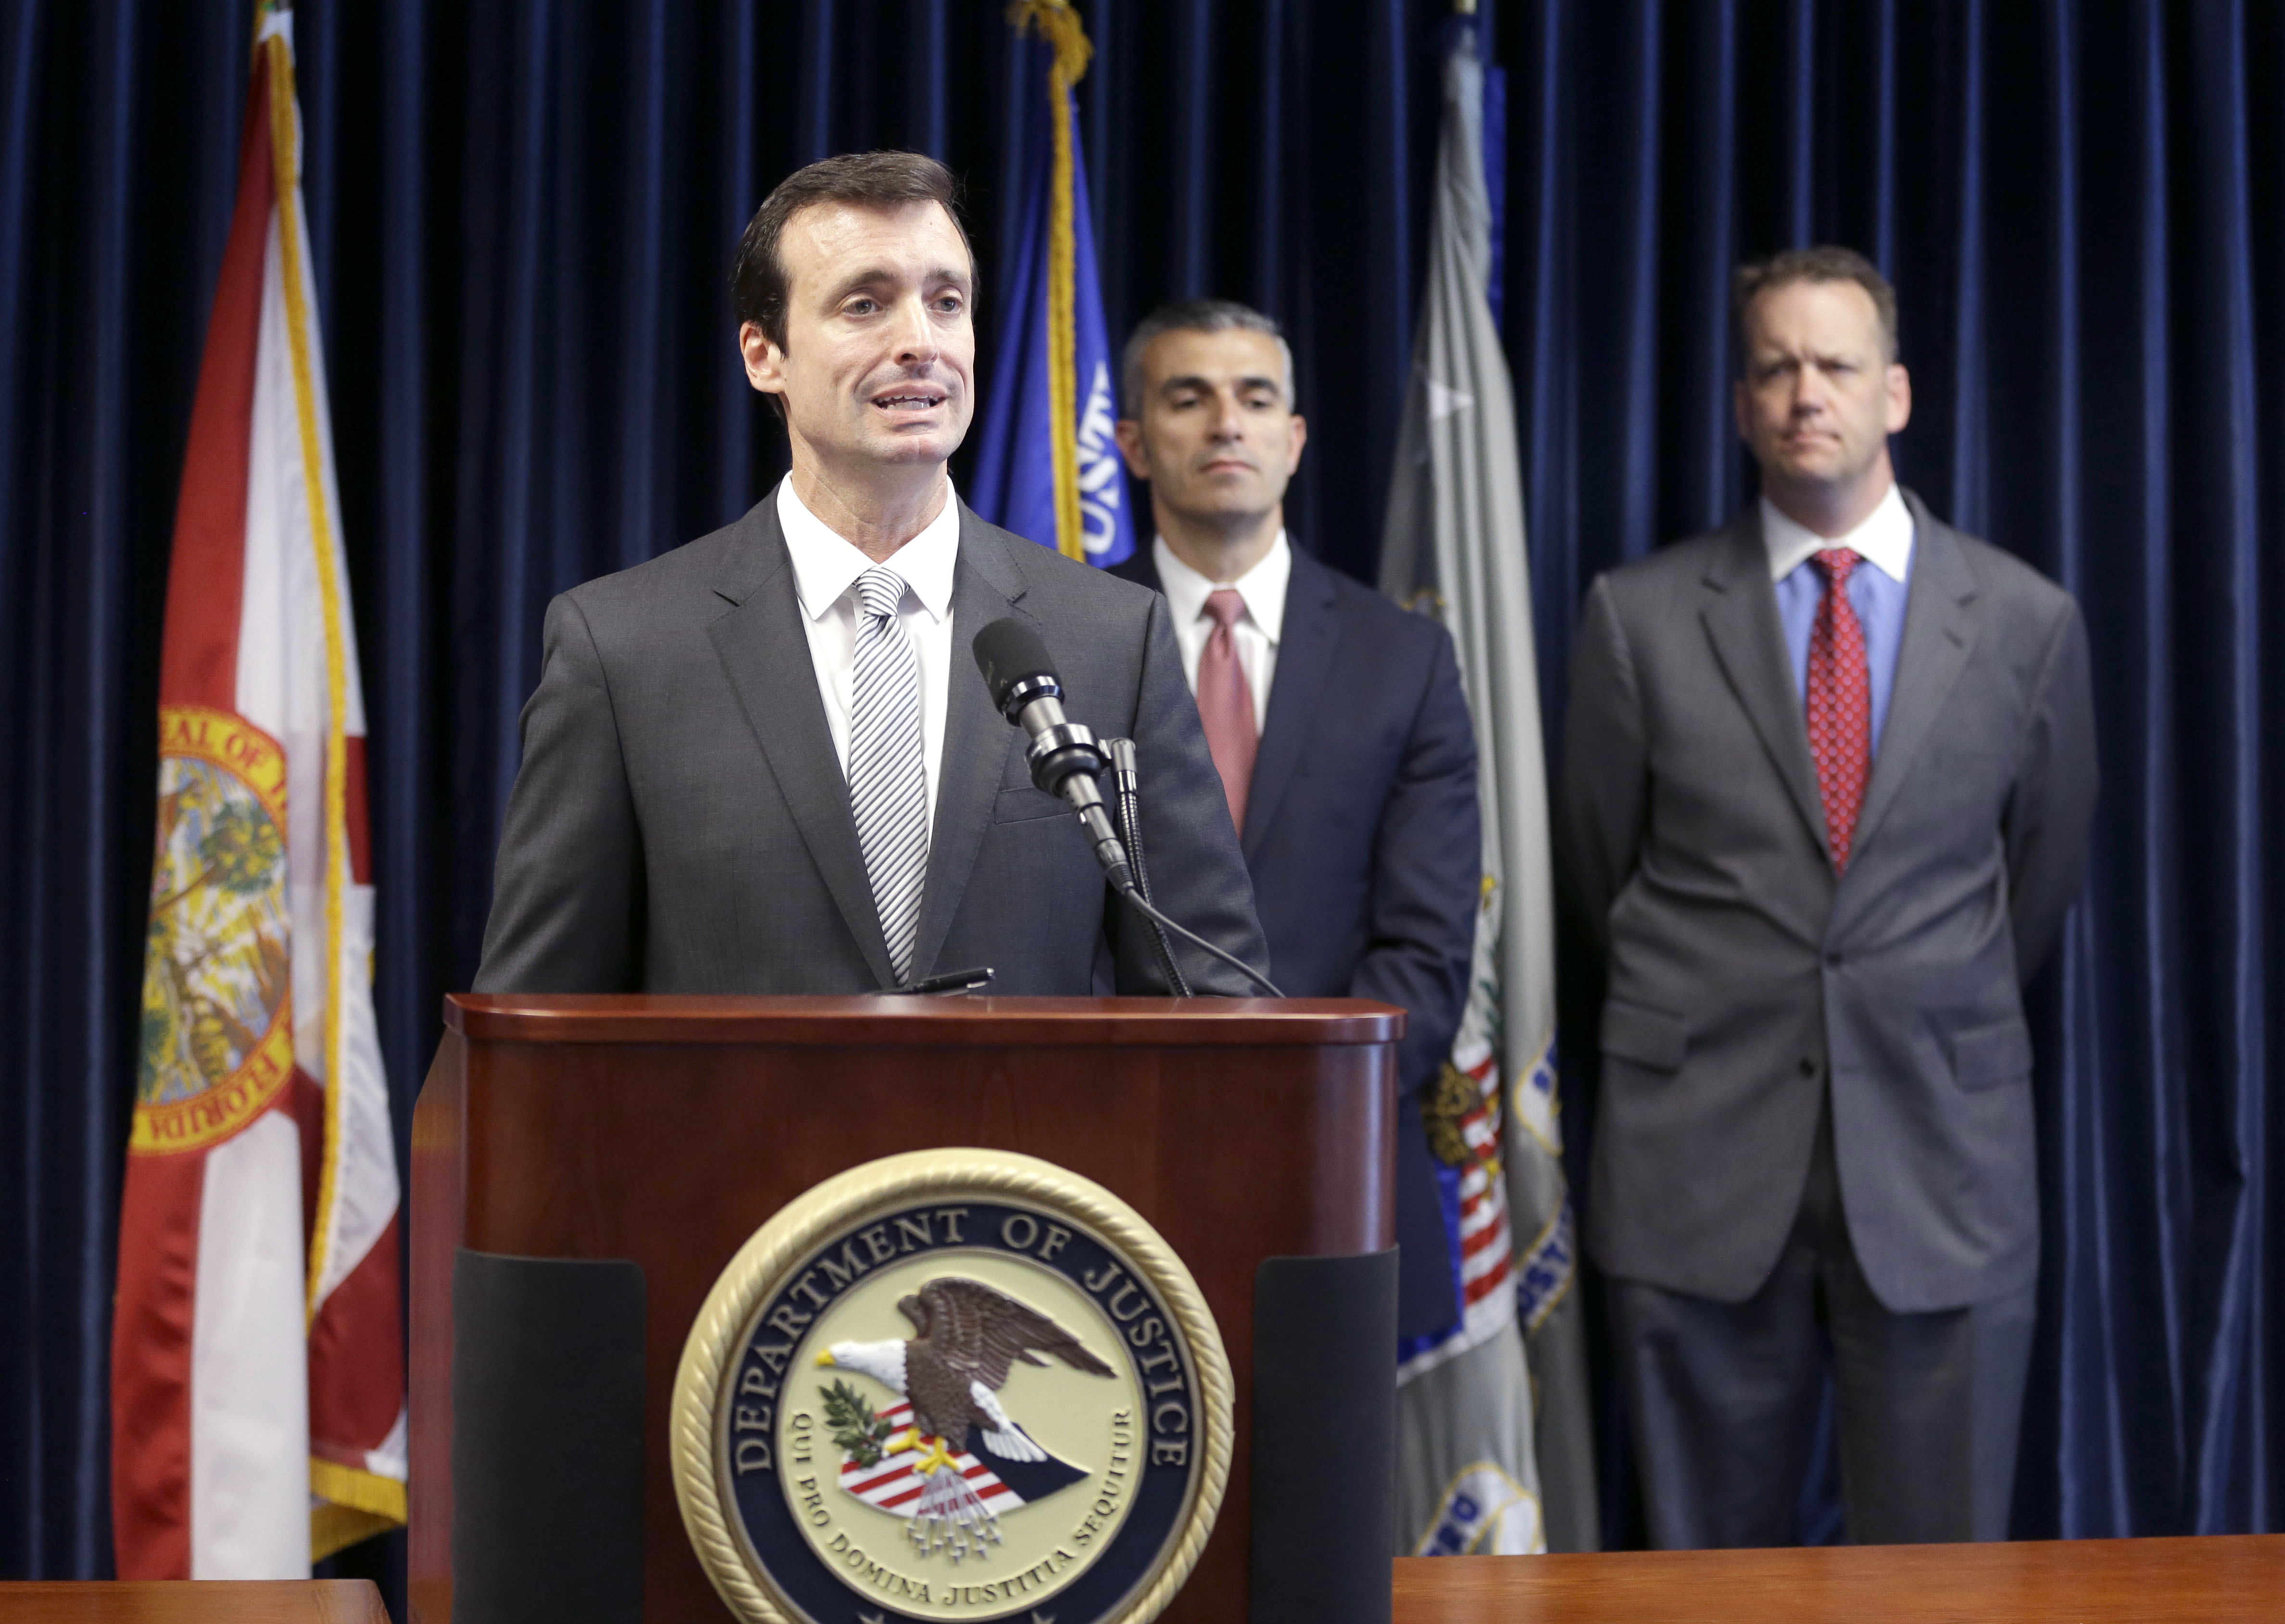 Wifredo Ferrer, left, U.S. Attorney for the Southern District of Florida, announces the arrest of 90 individuals in a Medicare fraud sting operation on May 13, 2014 in Miami. (AP)